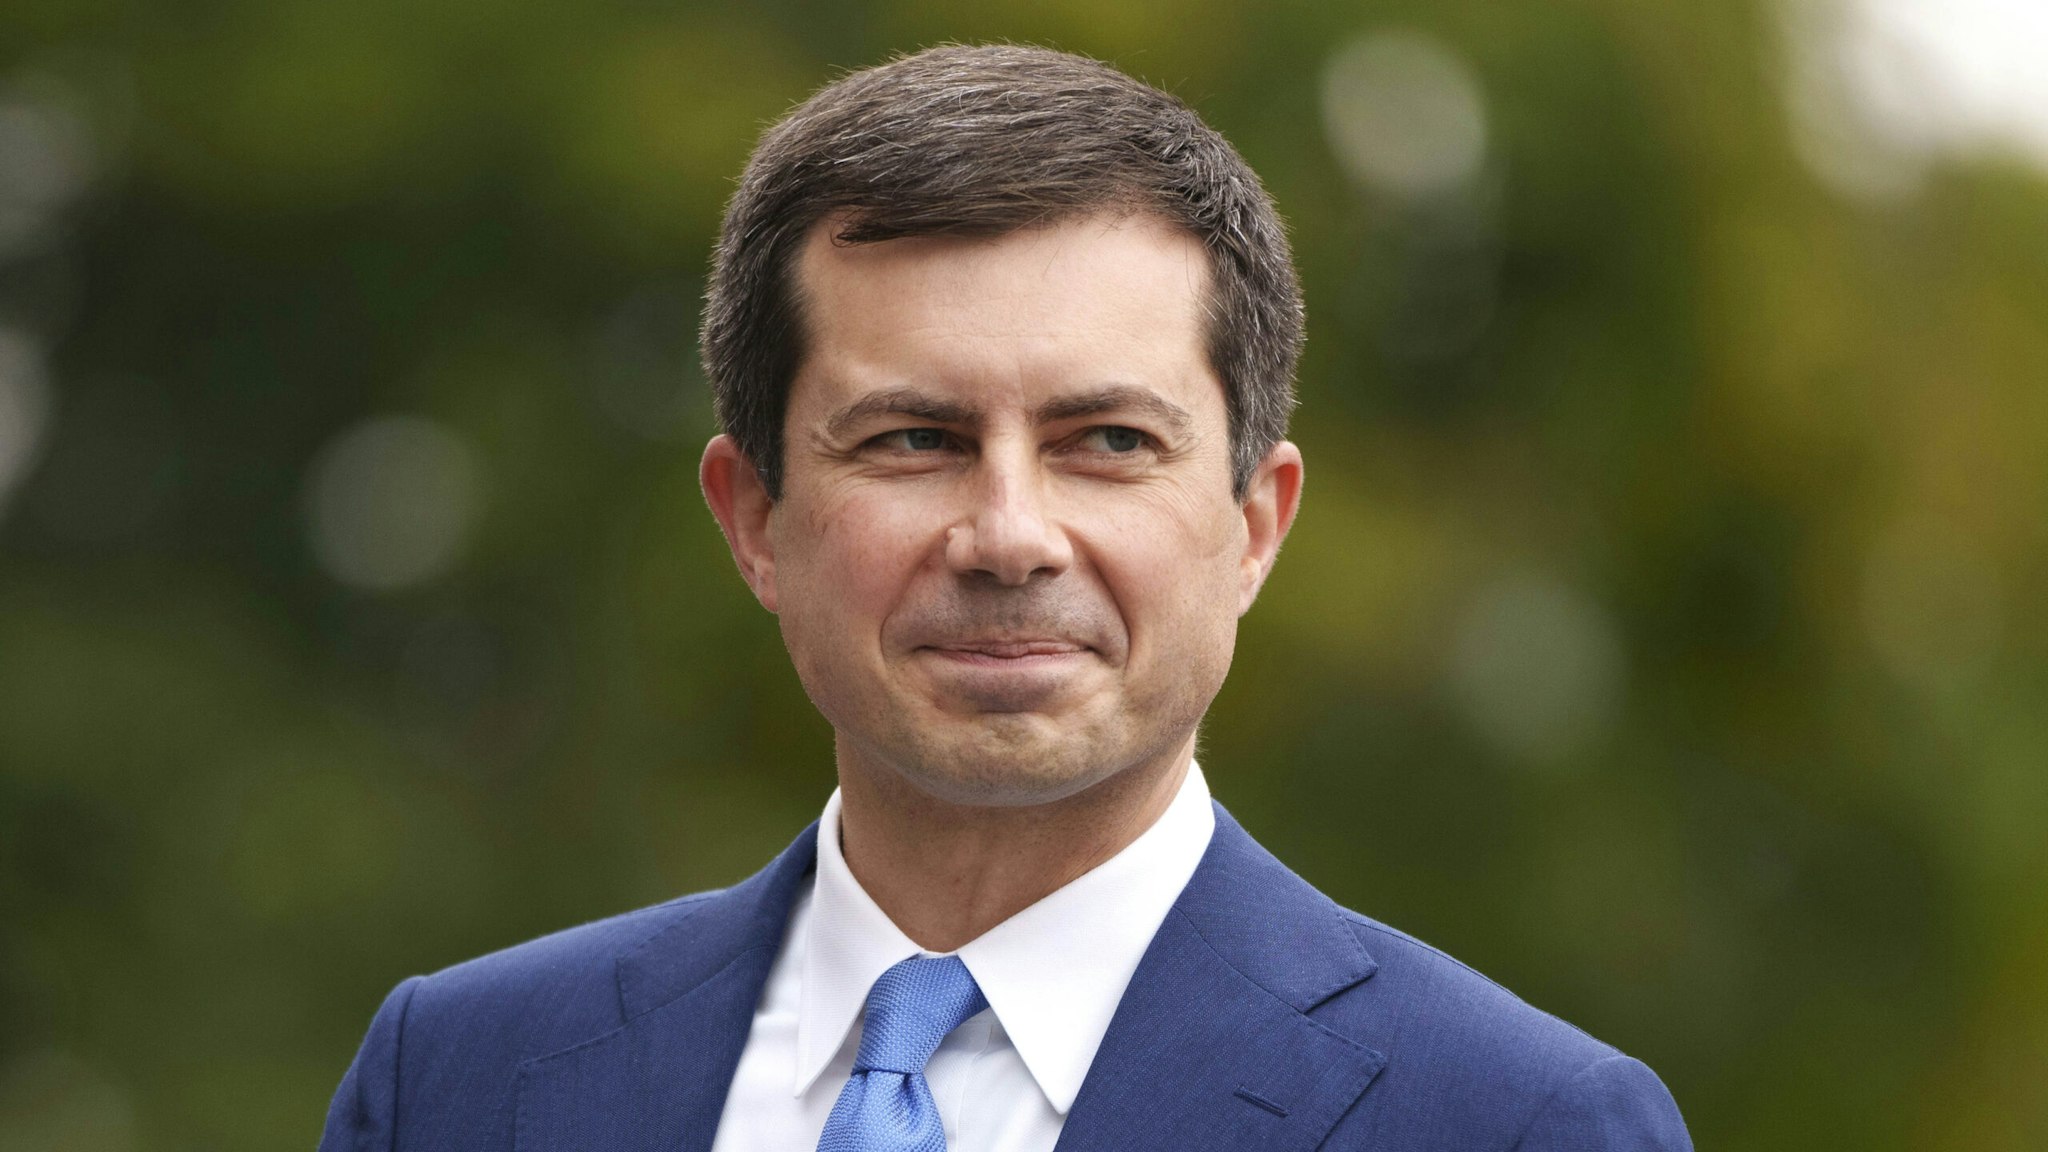 WASHINGTON, DC - OCTOBER 13: U.S. Transportation Secretary Pete Buttigieg arrives for a television interview with CNBC outside the White House October 13, 2021 in Washington, DC. With the holiday season approaching, President Biden is expected to announce that the Port of Los Angeles will begin to operate 24 hours a day in efforts to relieve the backlog in the supply chain that delivers goods to the United States. Americans have seen delays in a host of consumer goods, including electronics, cars, lumber, toys and more.